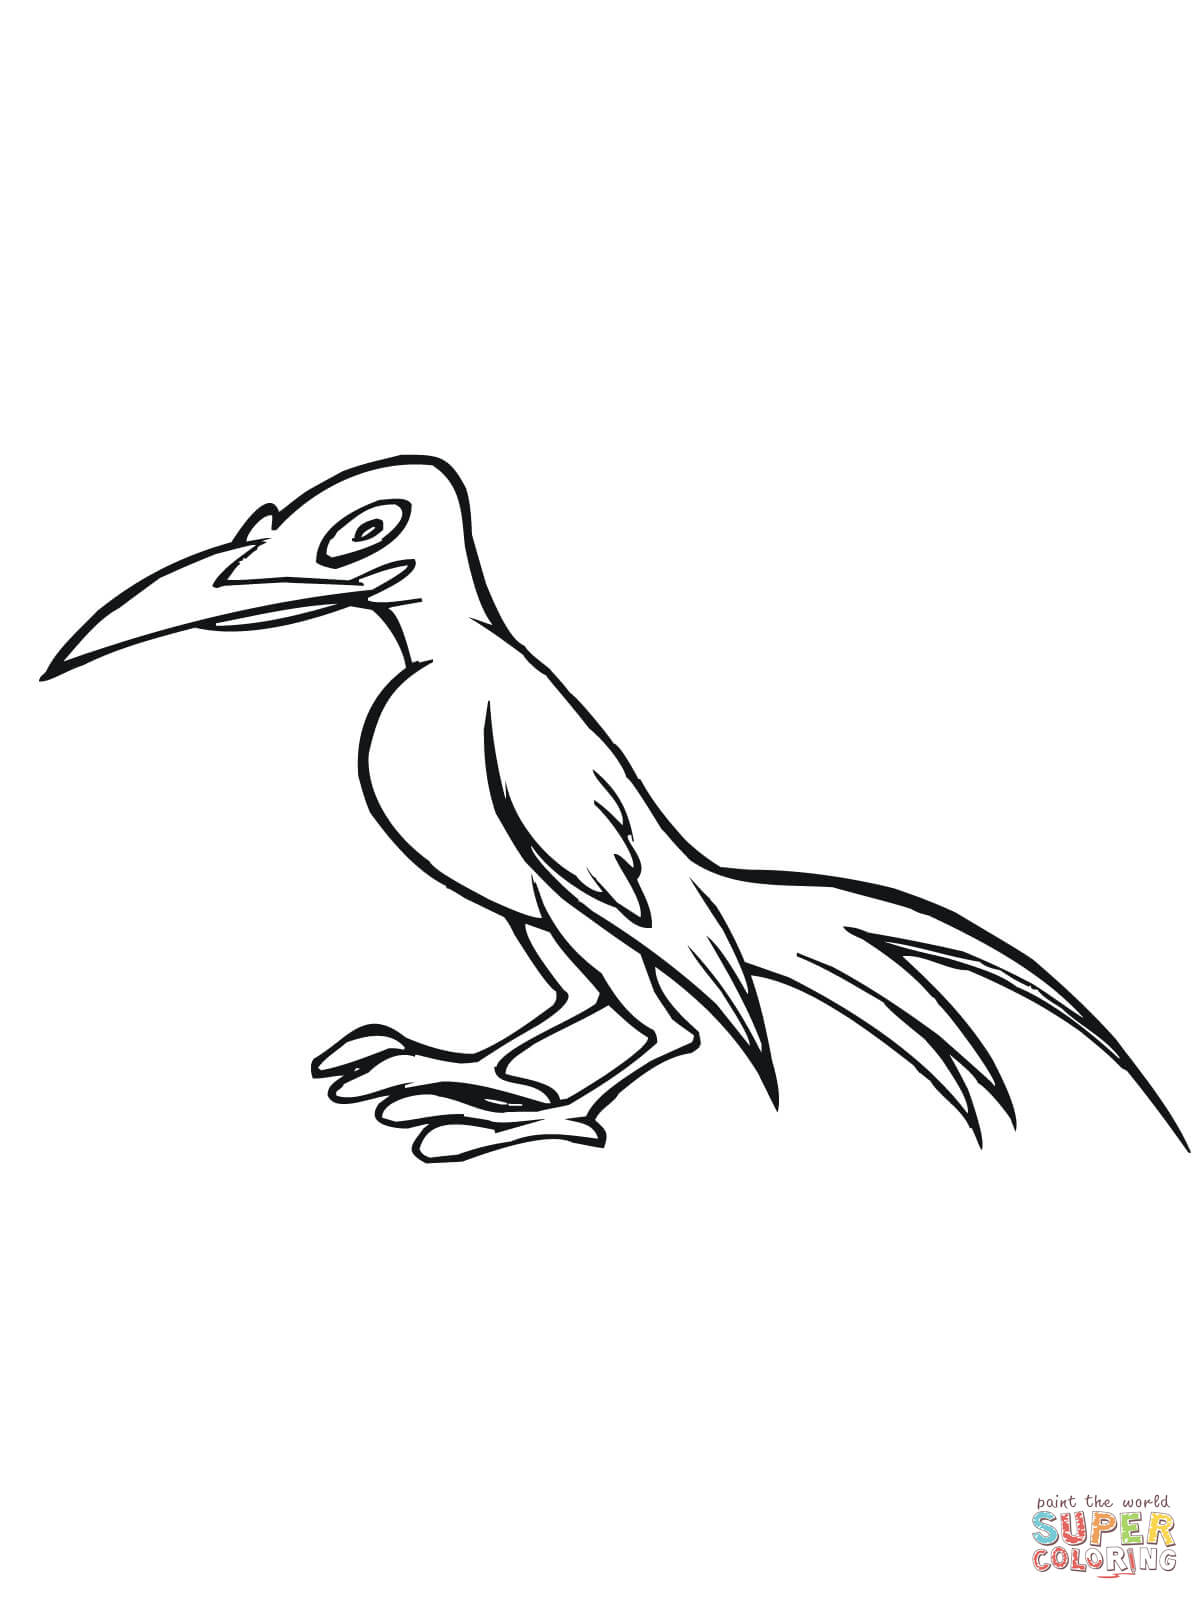 Magpie coloring #4, Download drawings